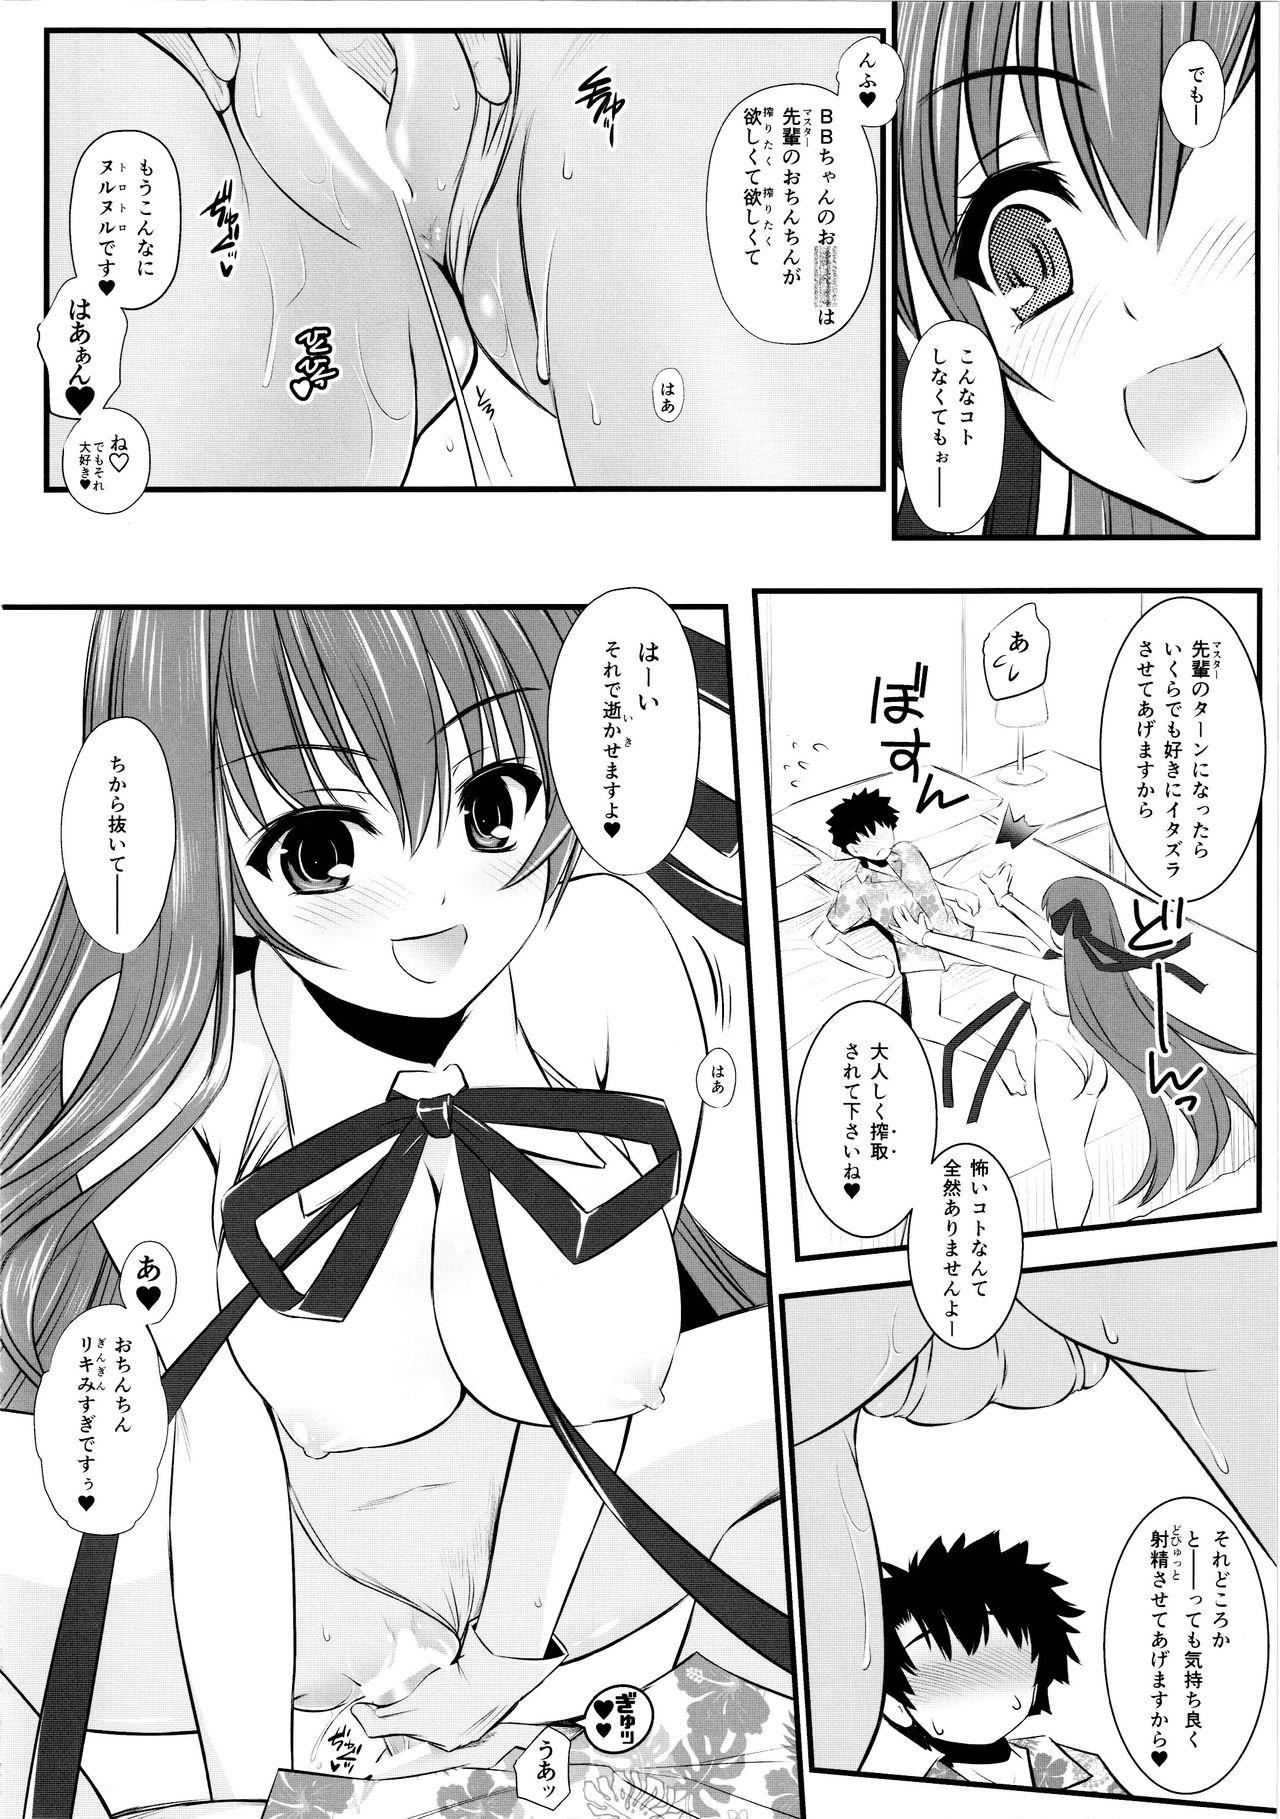 Ginger (C96) [Yakan Honpo (Inoue Tommy)] Queen [Kyuuin] BB-chan (Fate/Grand Order) - Fate grand order Pay - Page 8